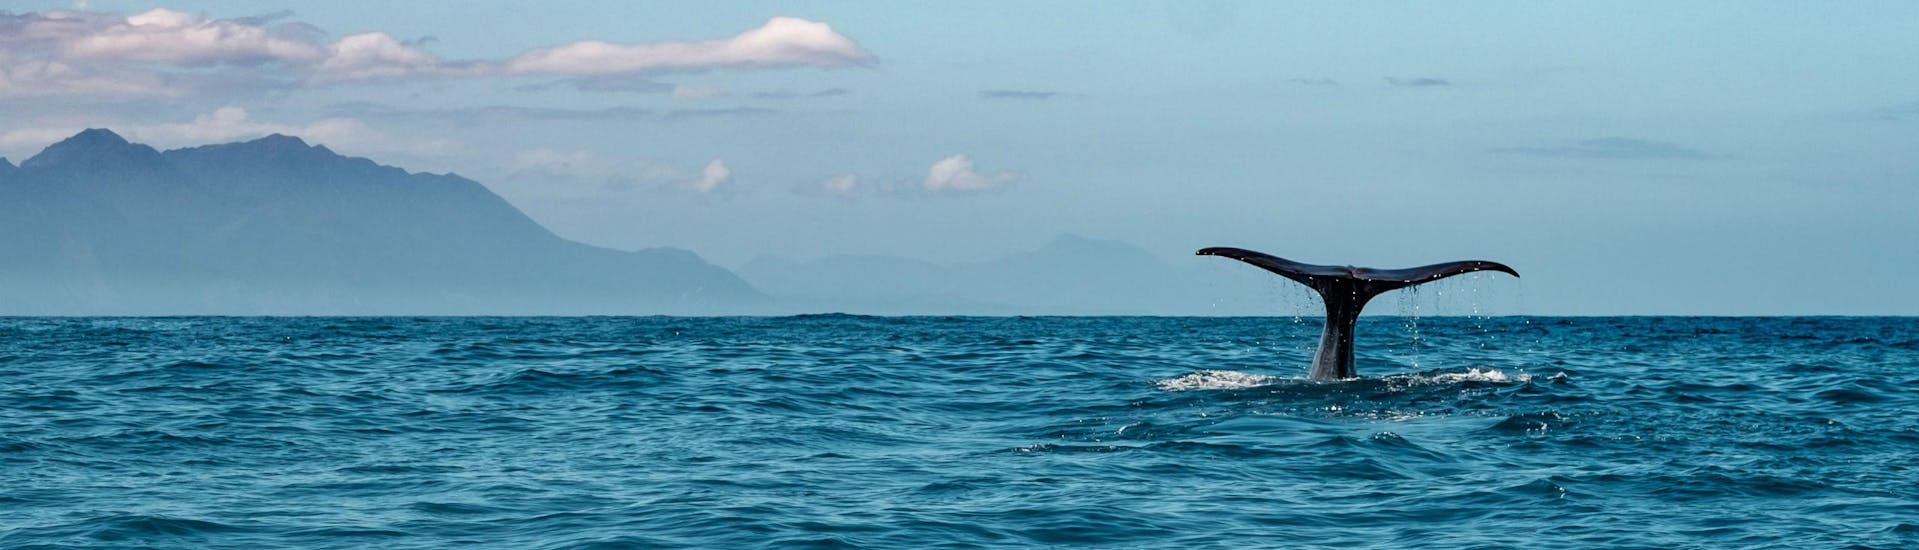 The fin of a whale can be seen on the surface of the ocean, as seen on a boat trip in Kaikoura.